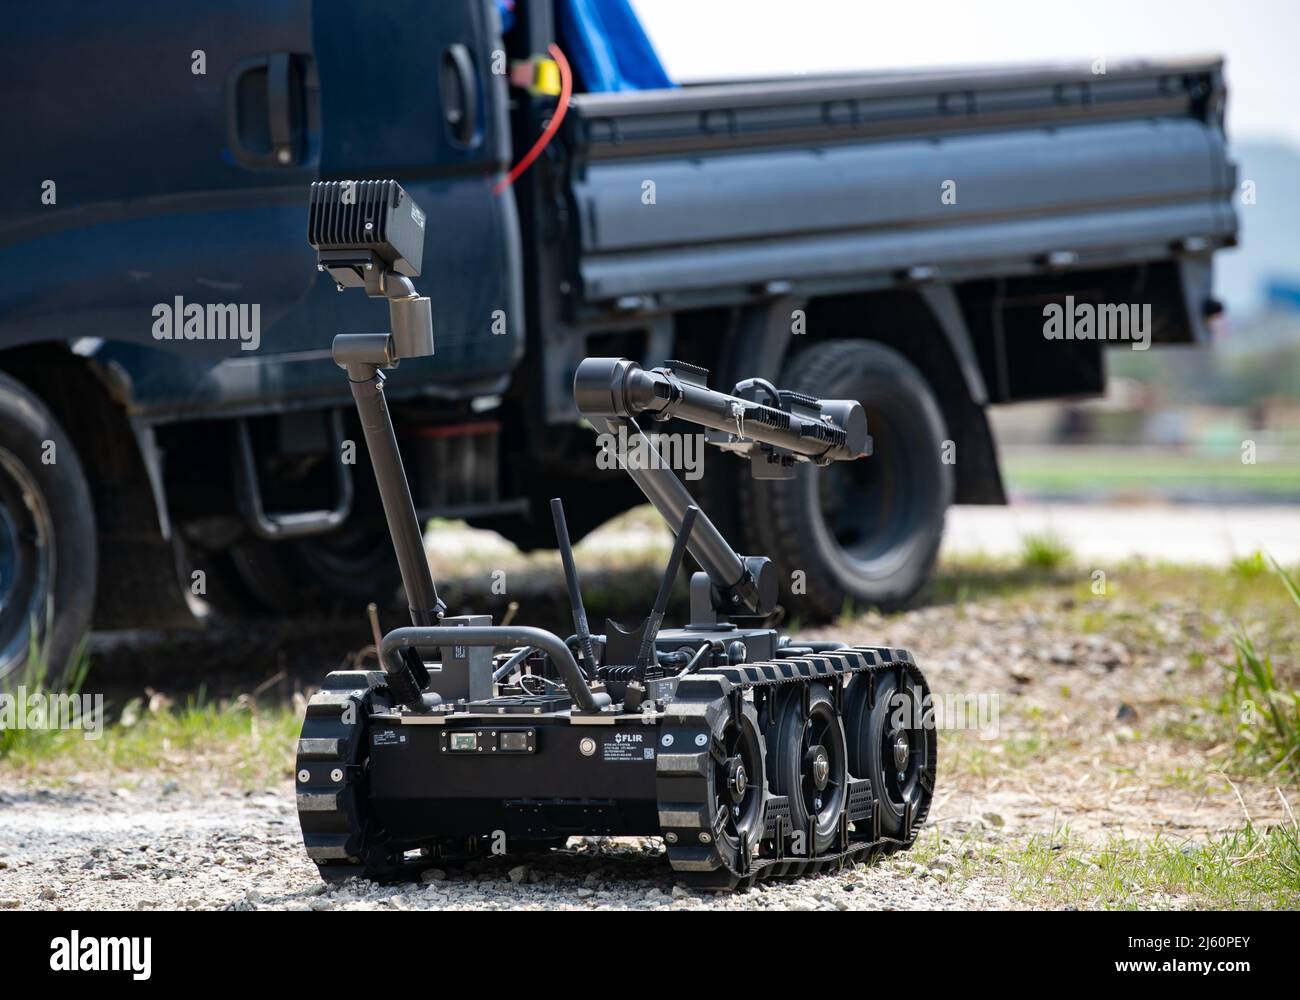 A Man Transportable Robotic System (MTRS) - Increment II robot advances toward a vehicle with a simulated suspected explosive during a training event at Kunsan Air Base, Republic of Korea, April 22, 2022. The MTRS is a remotely operated, medium-sized robotic system that enables Explosive Ordnance Disposal units to detect, confirm, identify and dispose of unexploded explosive ordnance and other hazards from a safe distance. (U.S. Air Force photo by Staff Sgt. Gabrielle Spalding) Stock Photo